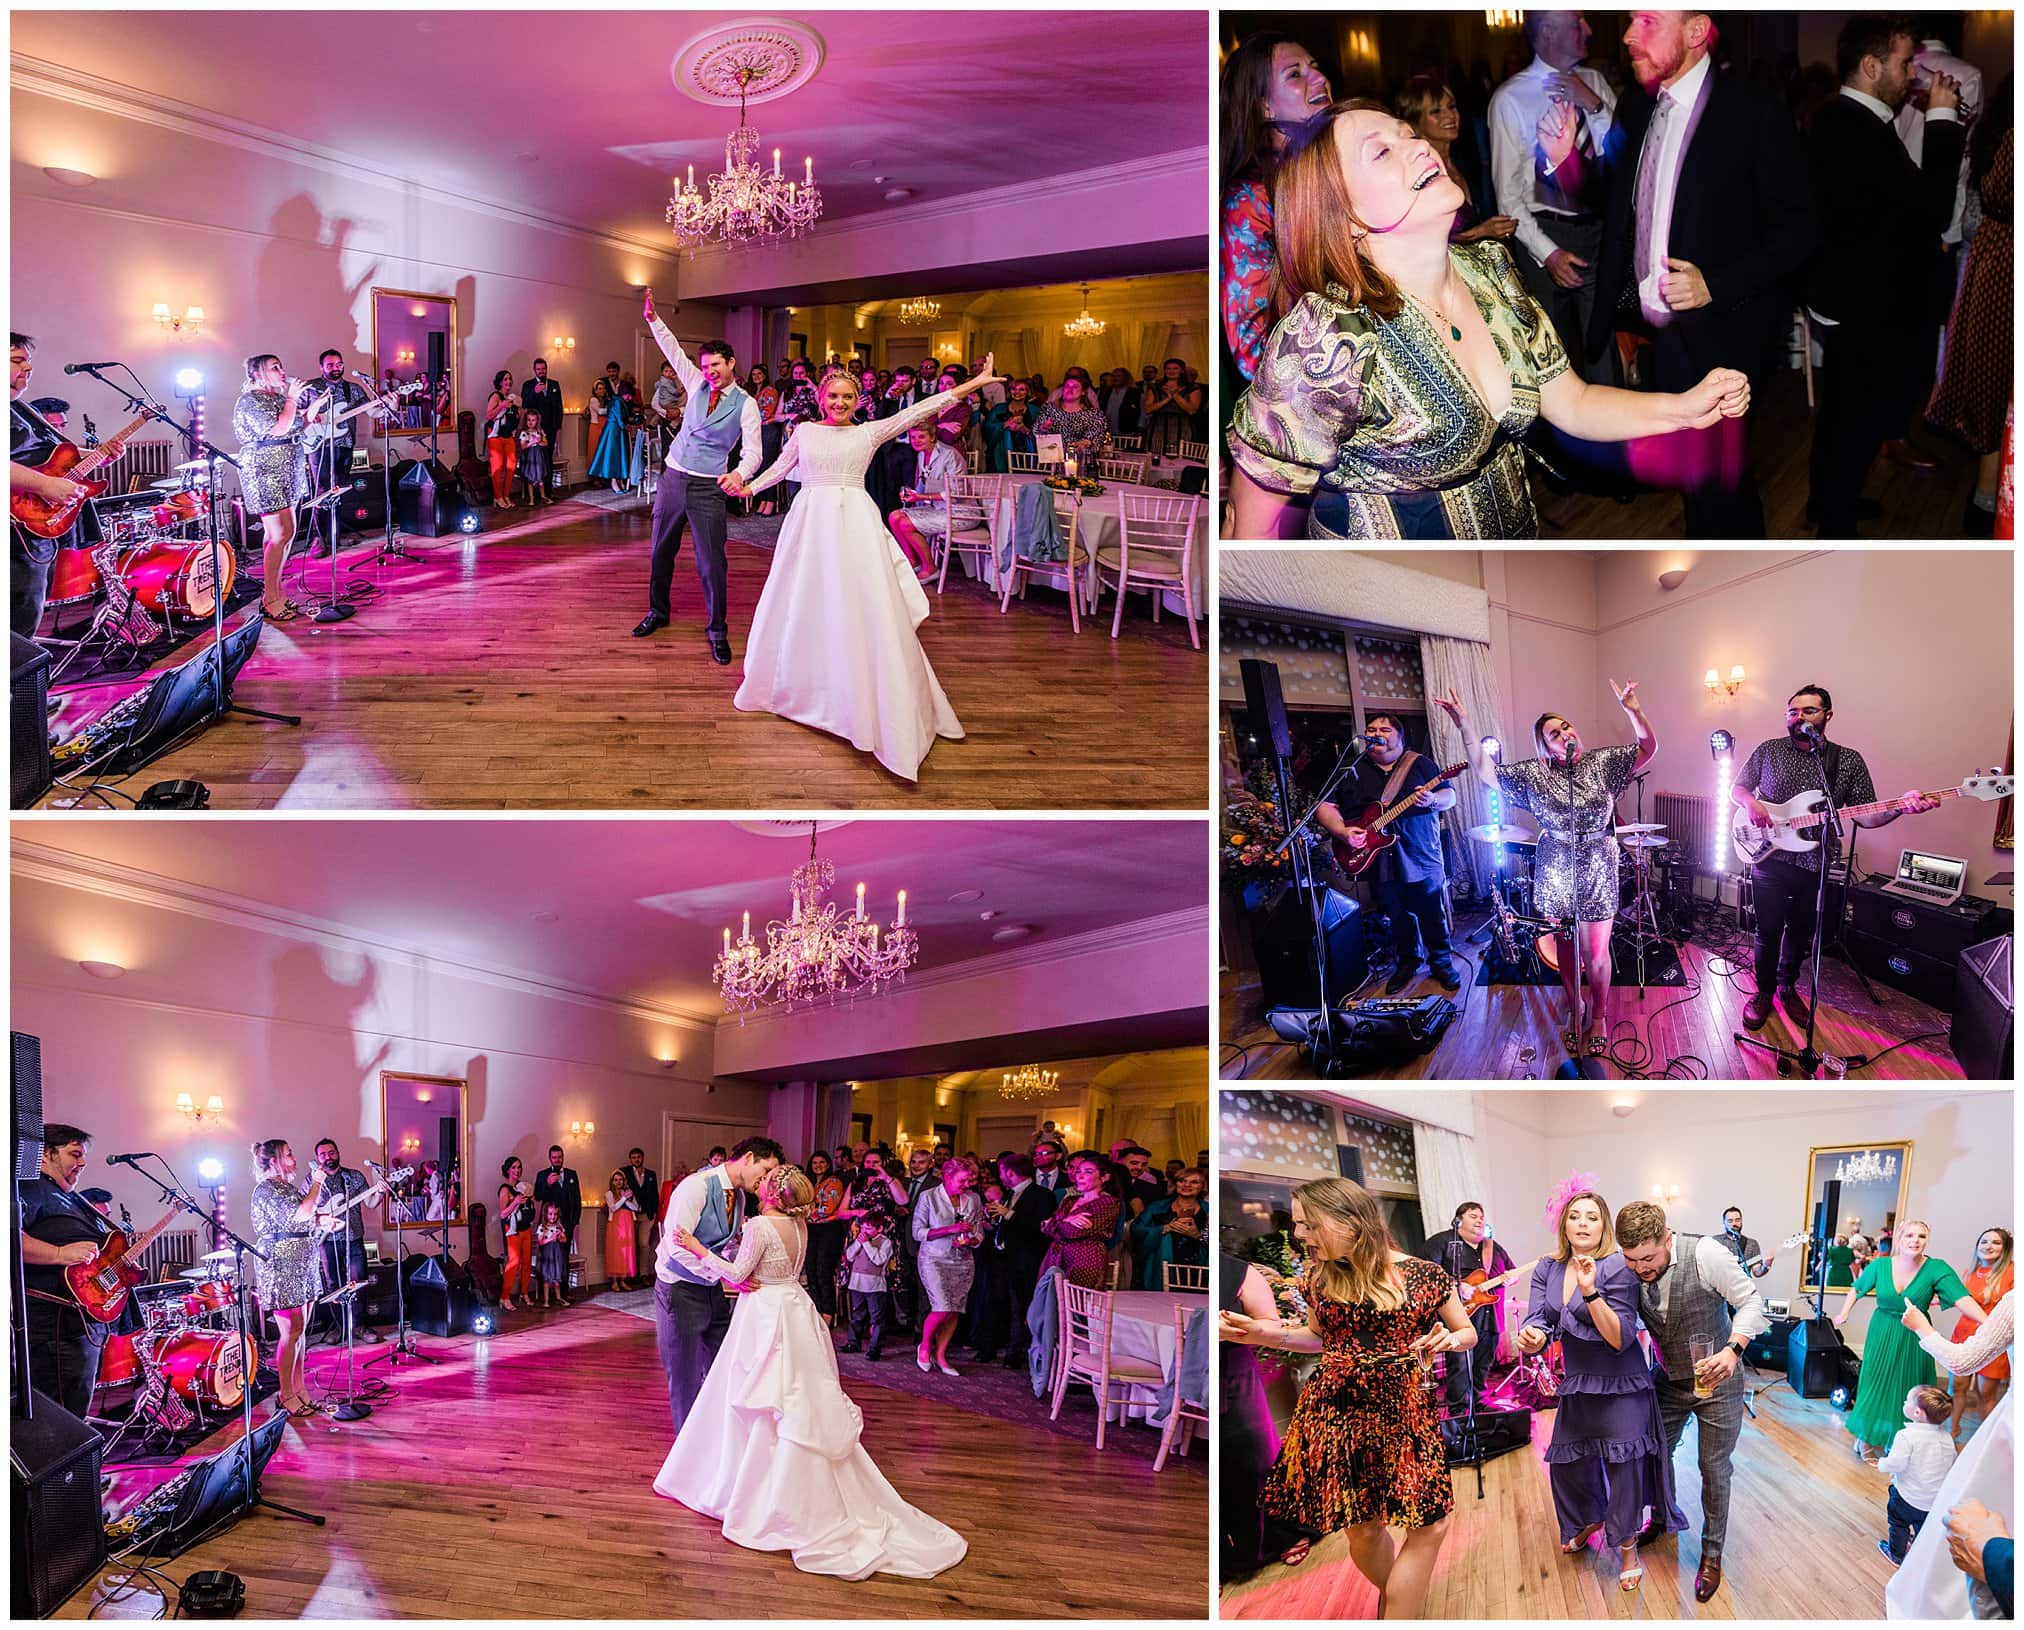 Dancing at a peterstone court wedding.